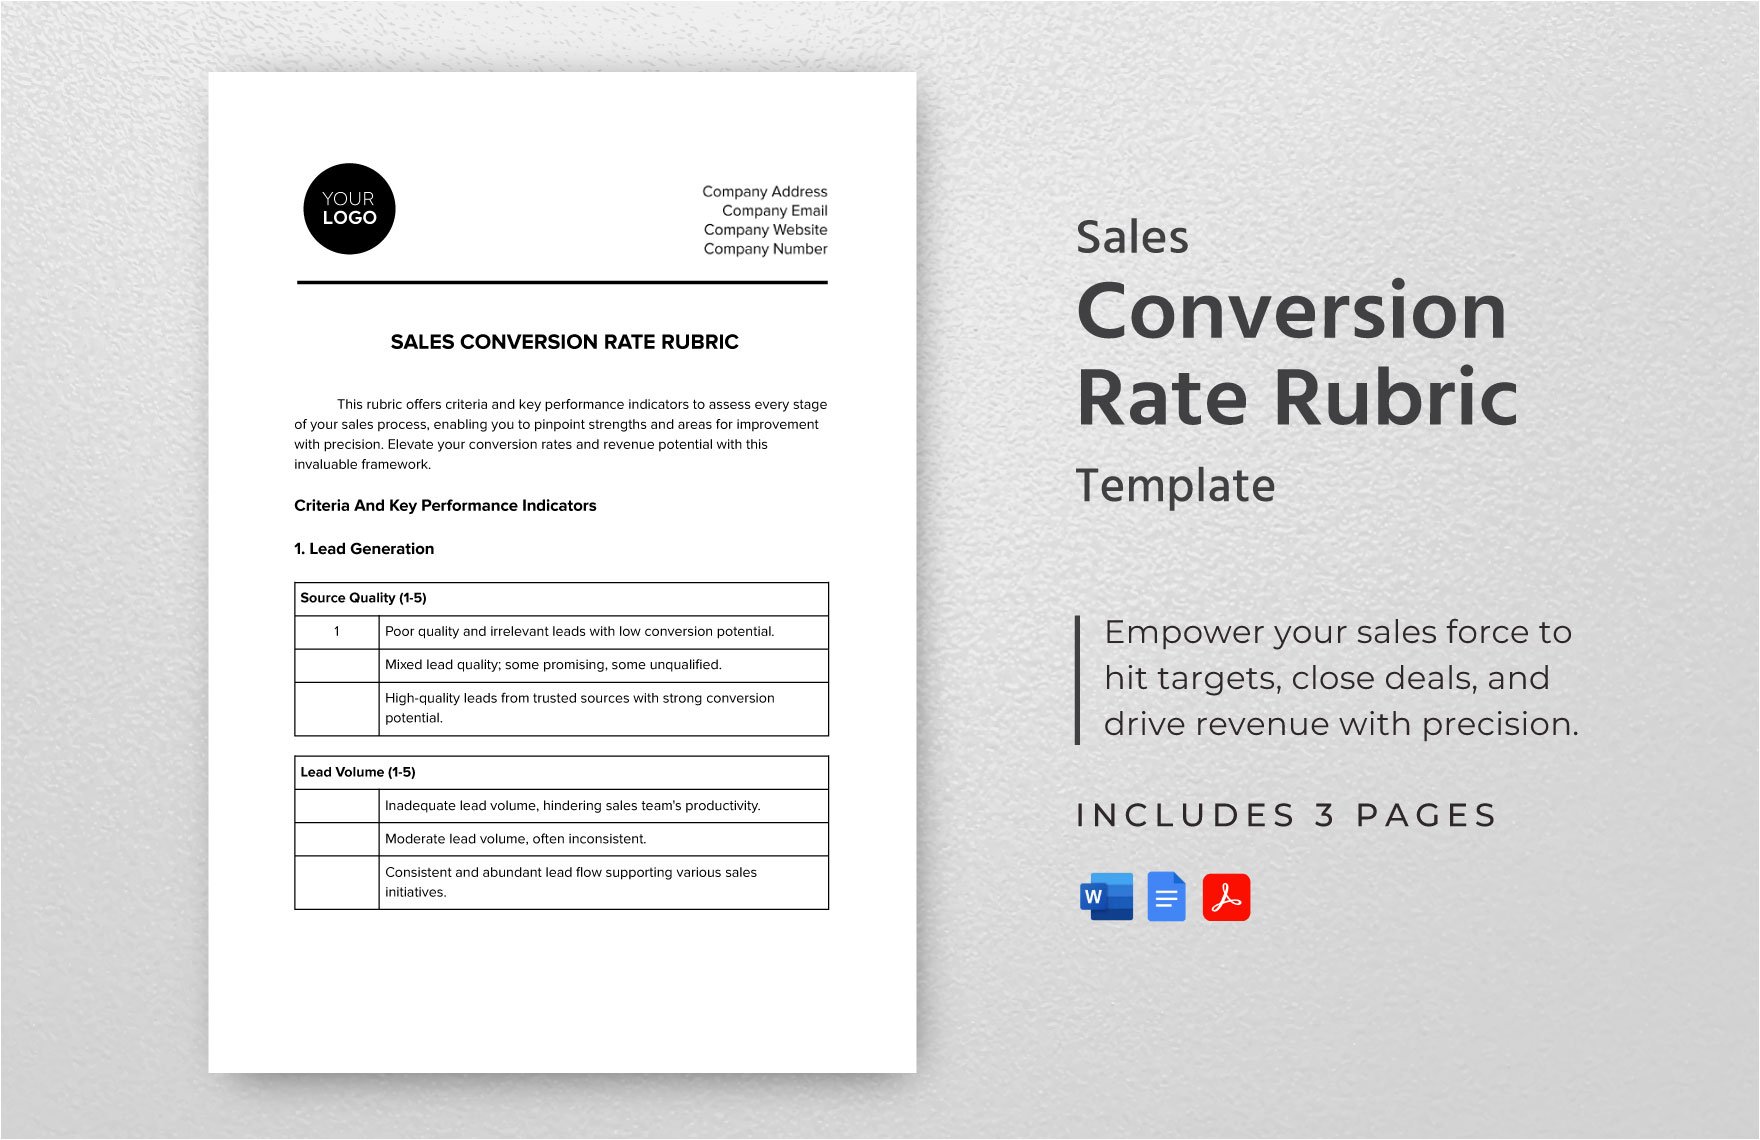 Sales Conversion Rate Rubric Template in Word, Google Docs, PDF